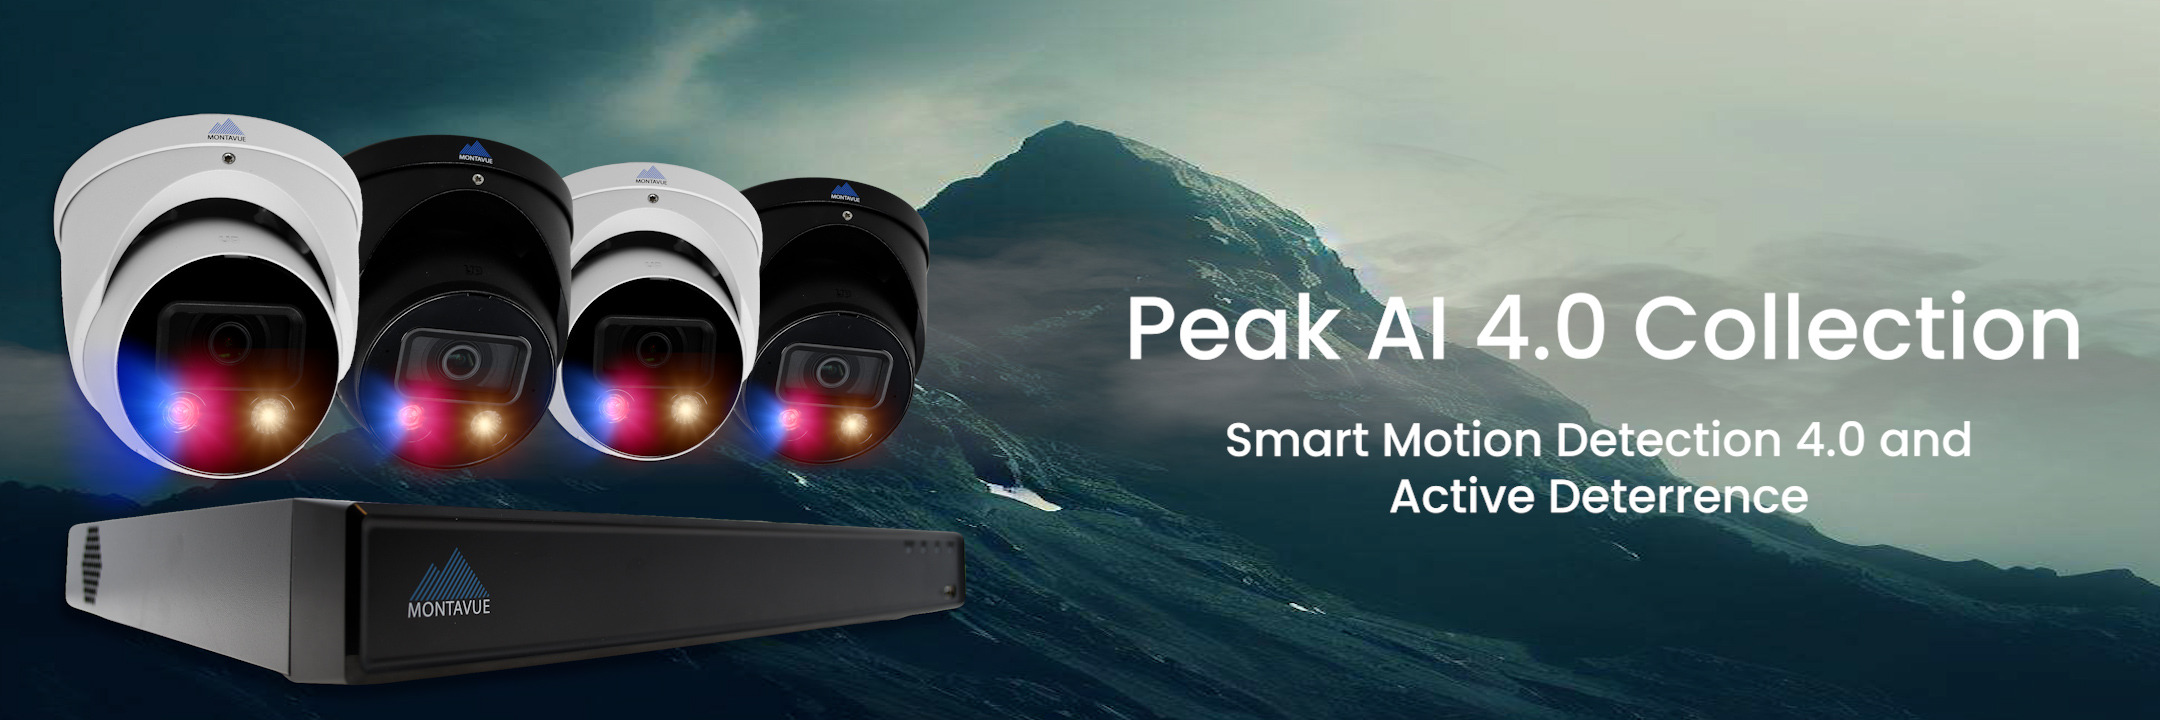 Peak AI 4.0 series security cameras with active deterrence